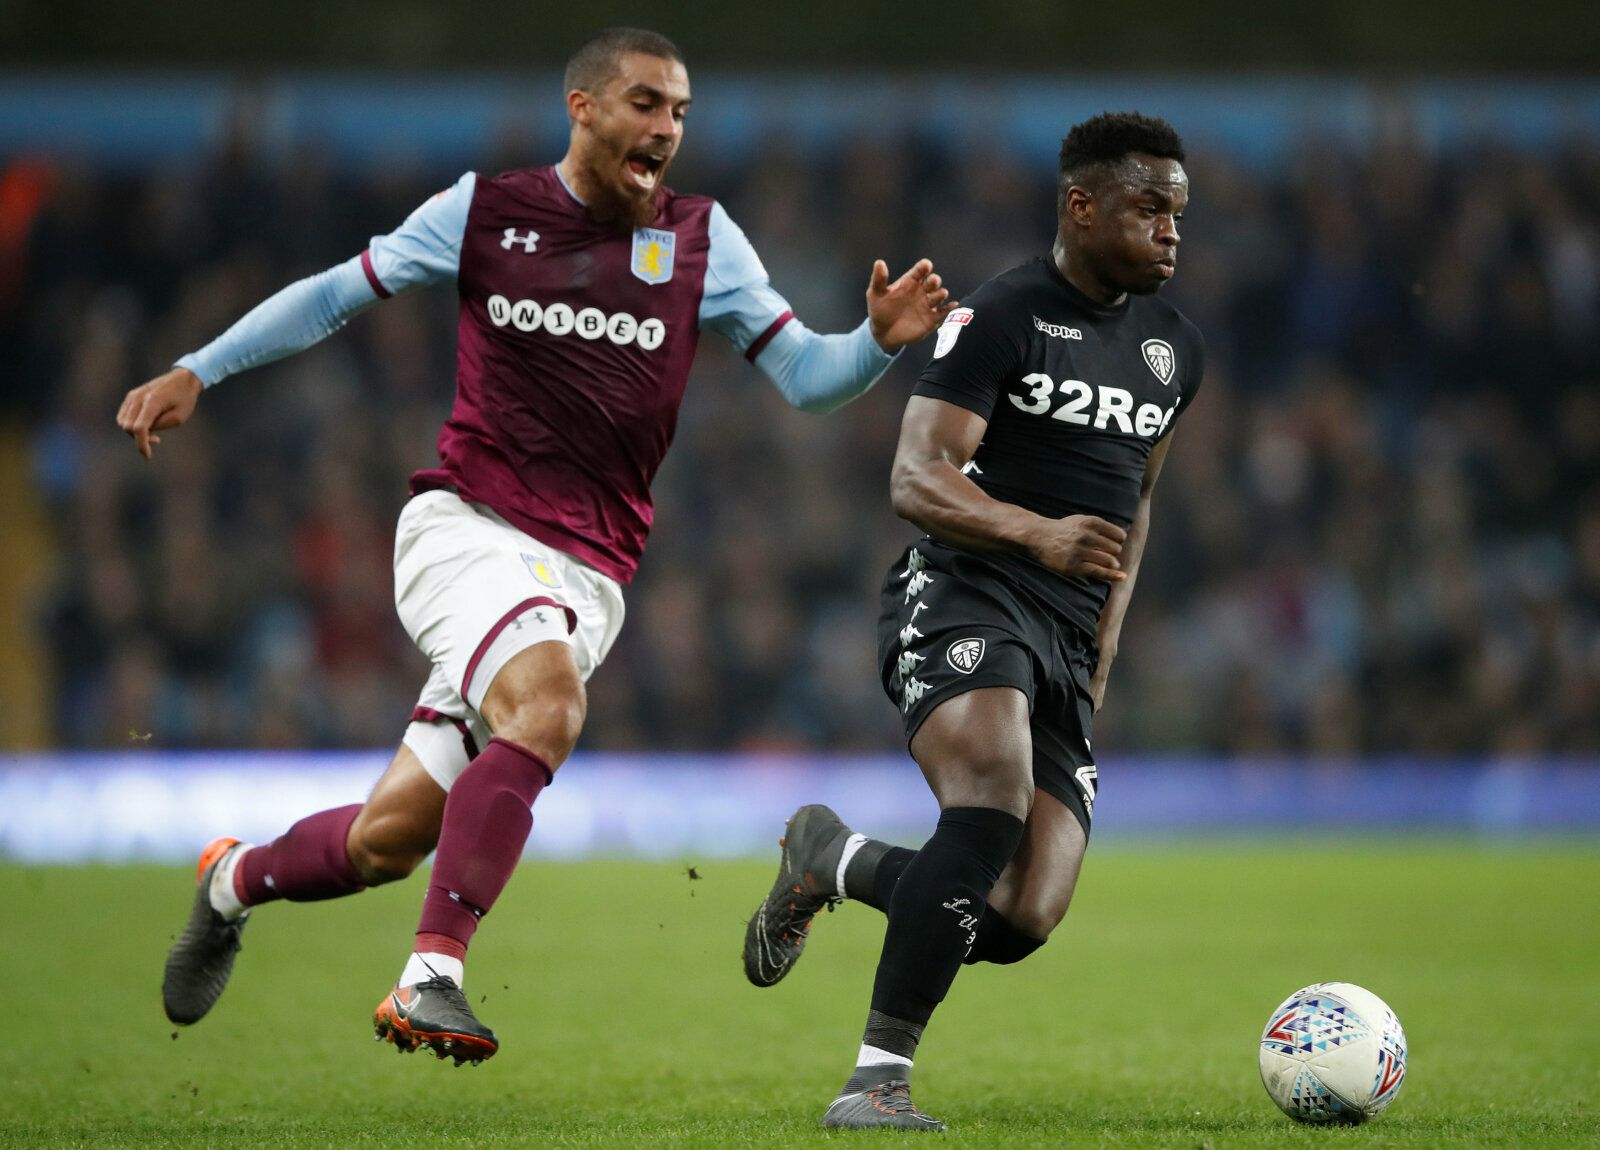 Soccer Football - Championship - Aston Villa vs Leeds United - Villa Park, Birmingham, Britain - April 13, 2018   Aston Villa's Lewis Grabban in action with Leeds United's Ronaldo Vieira   Action Images/Carl Recine    EDITORIAL USE ONLY. No use with unauthorized audio, video, data, fixture lists, club/league logos or 